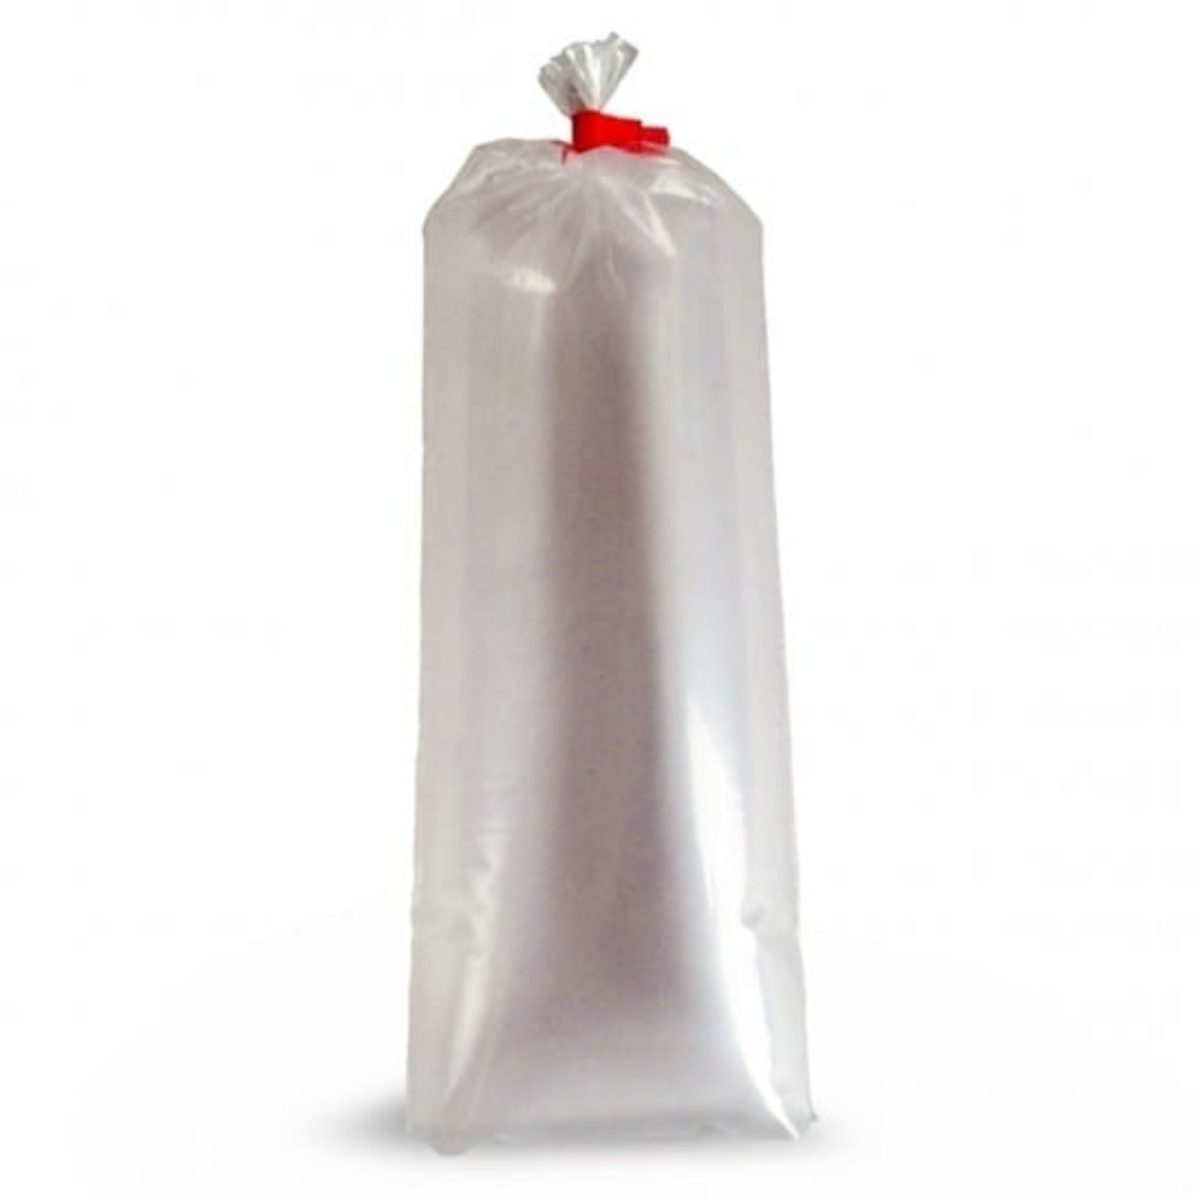 https://vacuumsealersunlimited.com/wp-content/uploads/2016/11/Clear-Meat-Bags-1200x1200.jpg